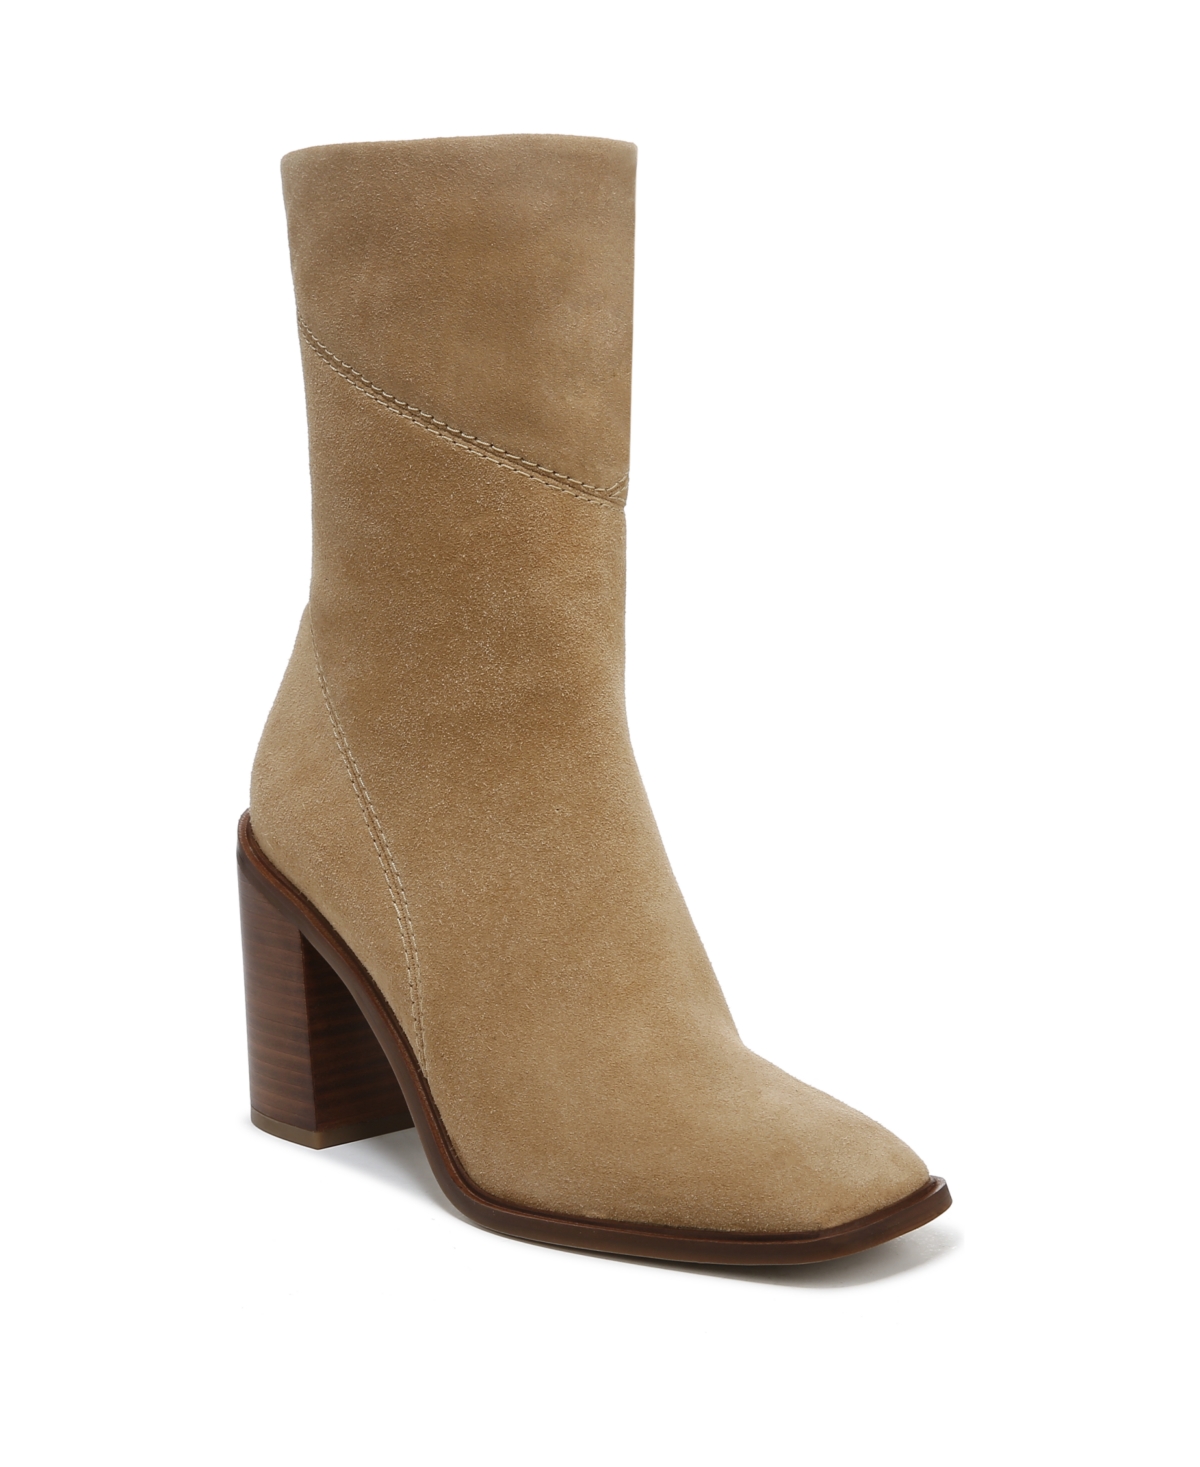 Women's Stevie Mid Shaft Boots - Cookie Tan Suede